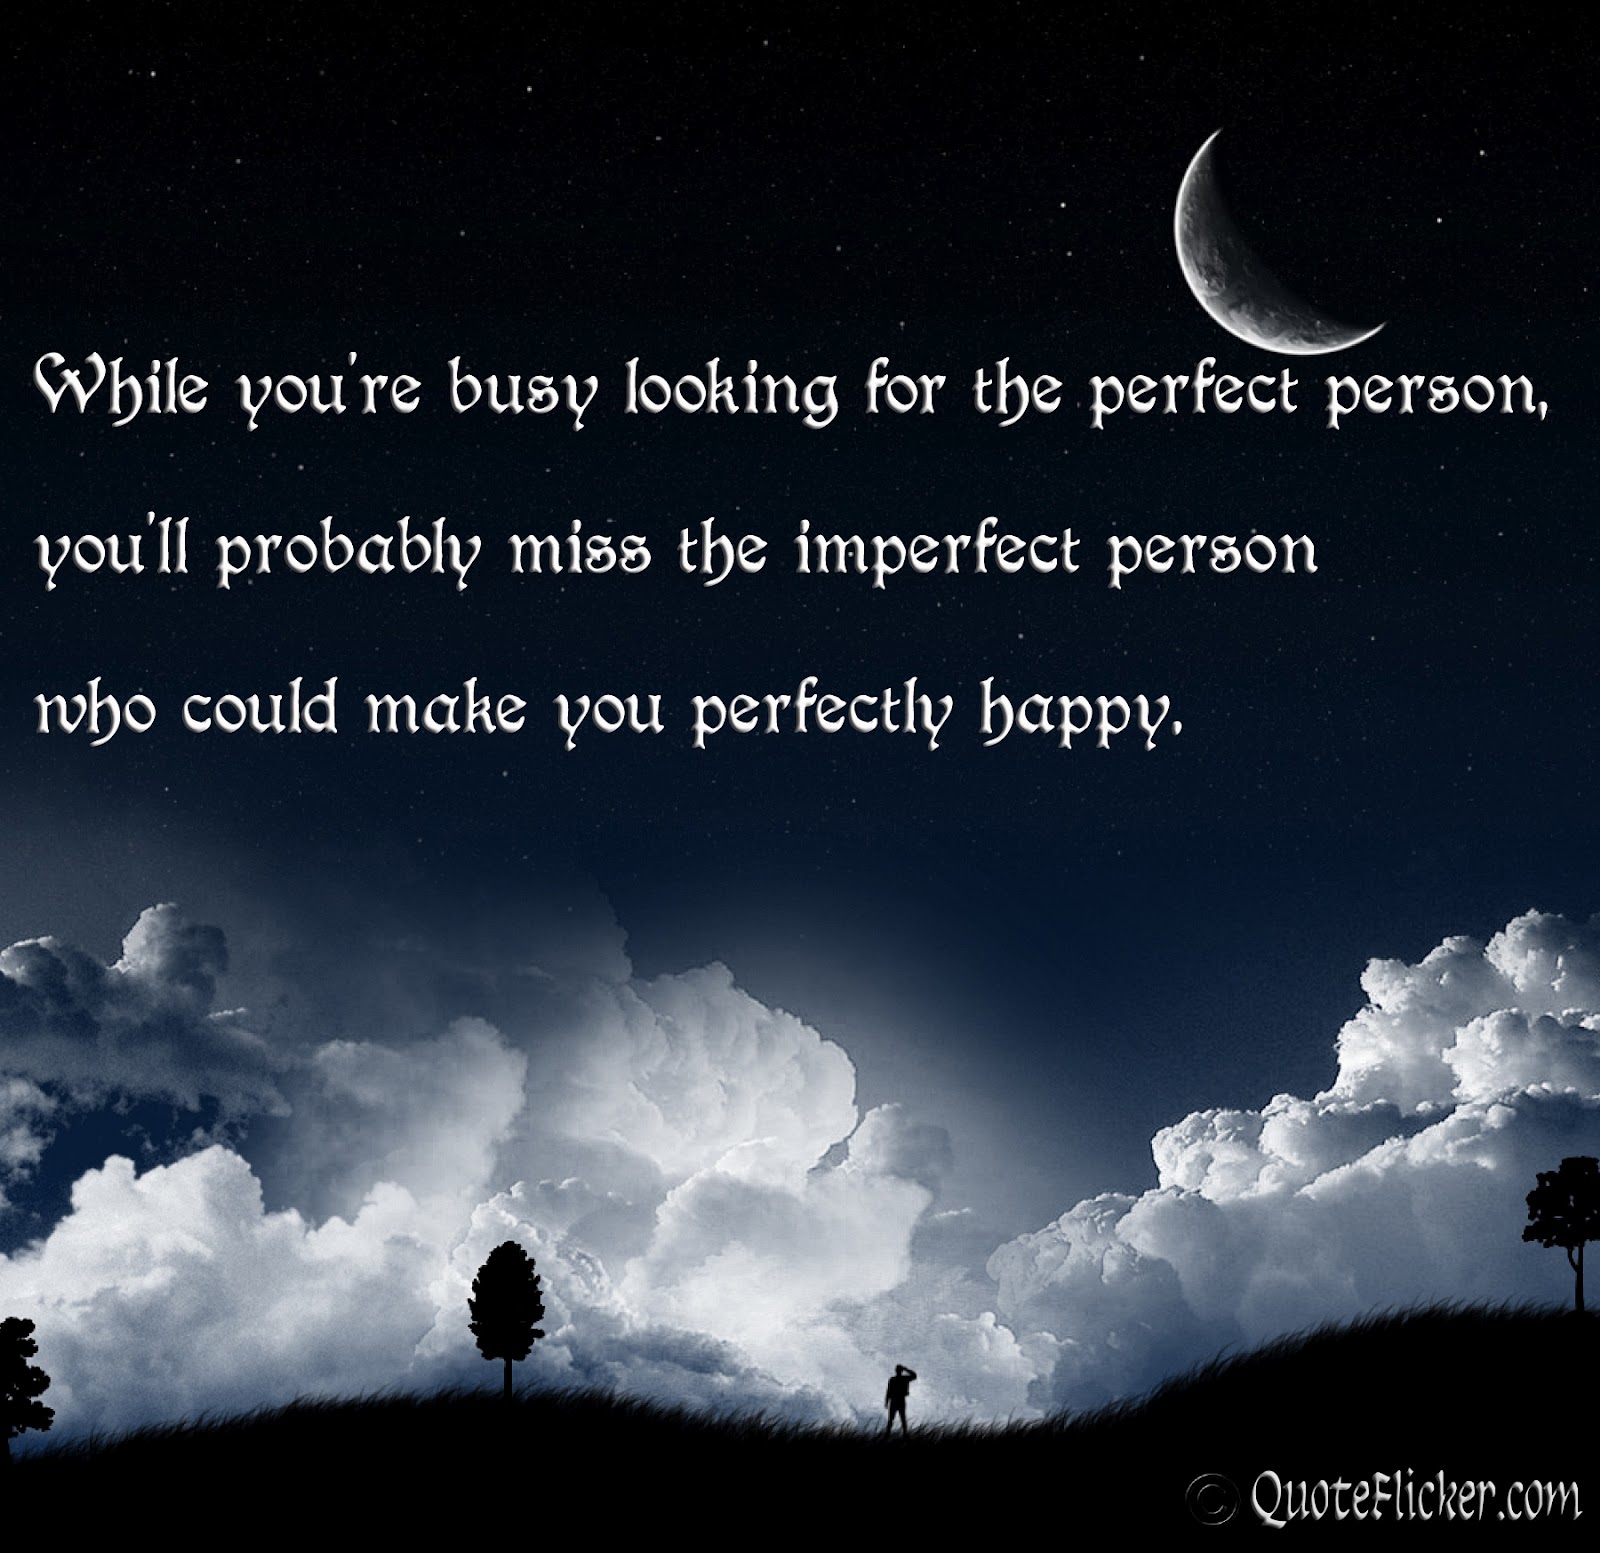 Miss the imperfect person